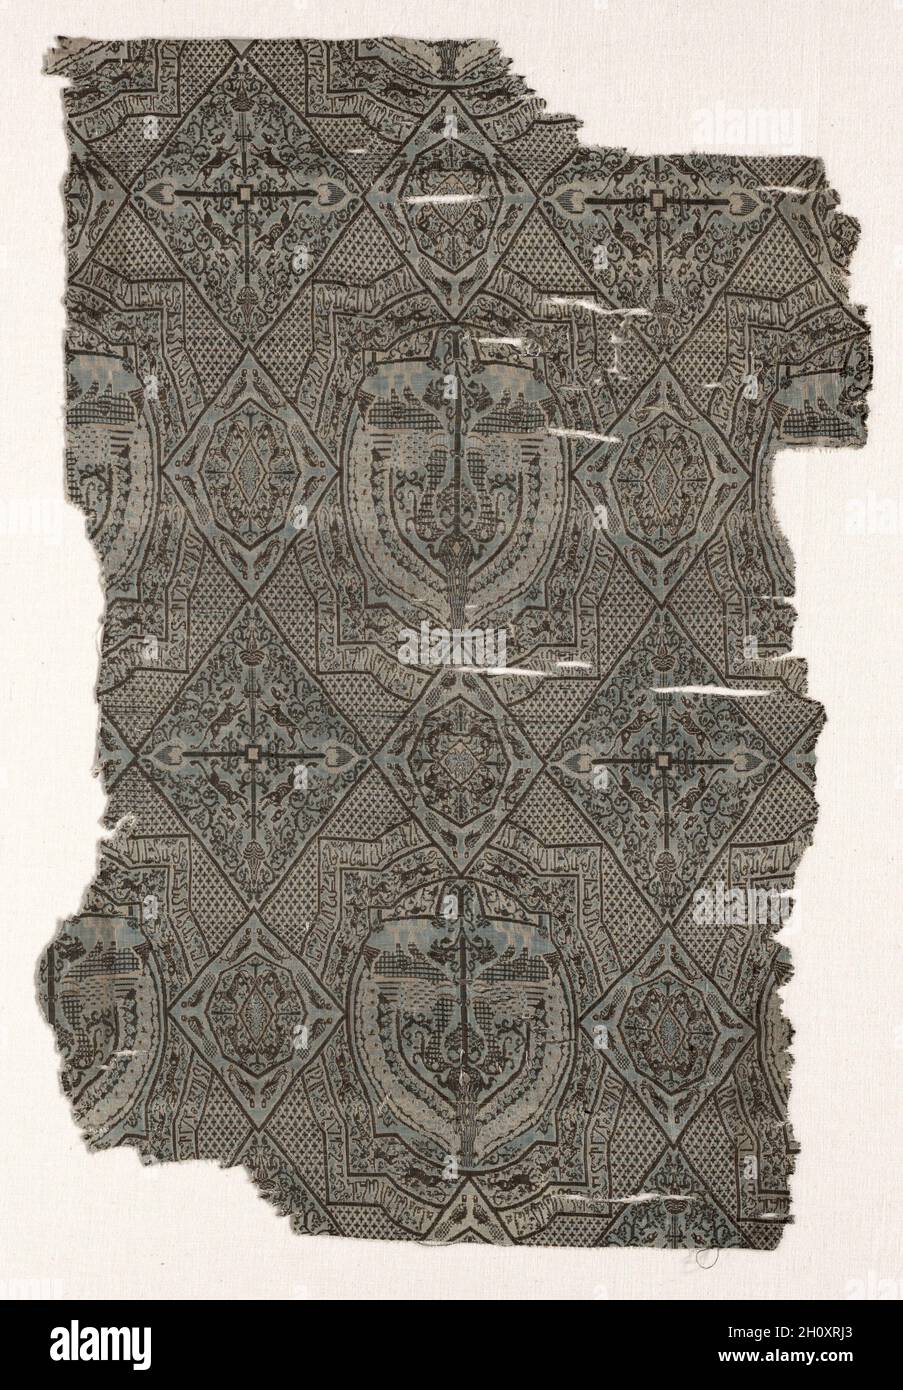 Fragments, before 1968. Iran or Iraq, in the style of the Seljuq period (1037–1194). Silk: lampas weave; average: 49 x 33 cm (19 5/16 x 13 in.).  Geometric medallions aligned on a diaper ground are enclosed in a grid of large and small lozenges. Medallions contain confronting peacocks flanking a Tree of Life. The double border has an inner frieze of running animals and an outer band of Kufic inscription. The larger diamonds contain four-directional palmette trees and two opposed pairs of rampant animals. The smaller diamonds have pairs of peacocks in each corner framing an octagon, which conta Stock Photo